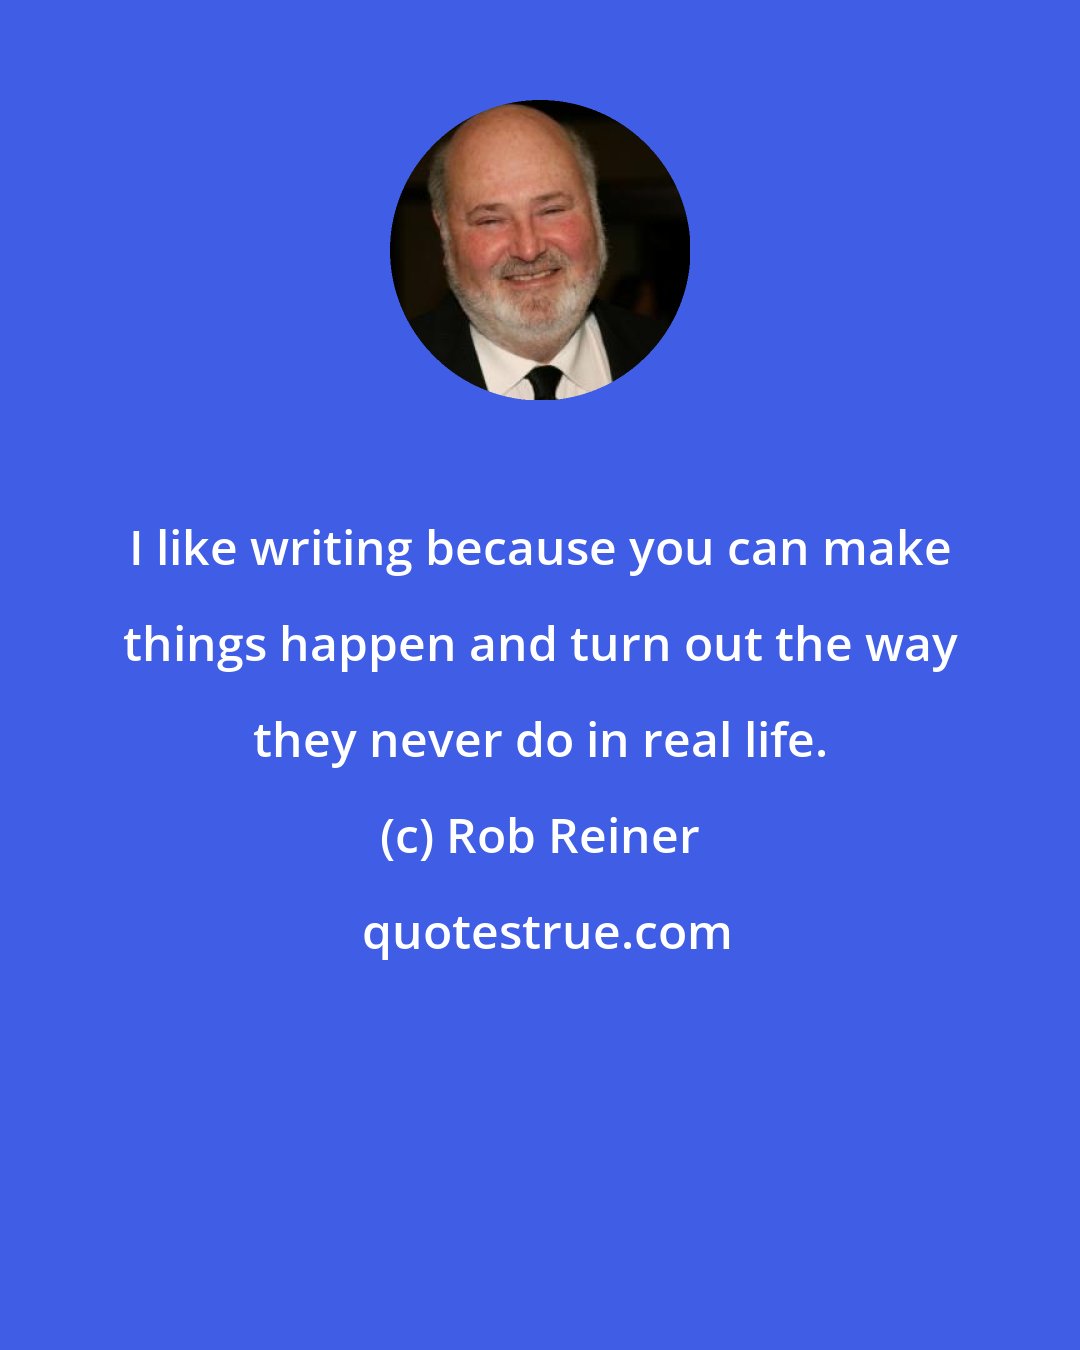 Rob Reiner: I like writing because you can make things happen and turn out the way they never do in real life.